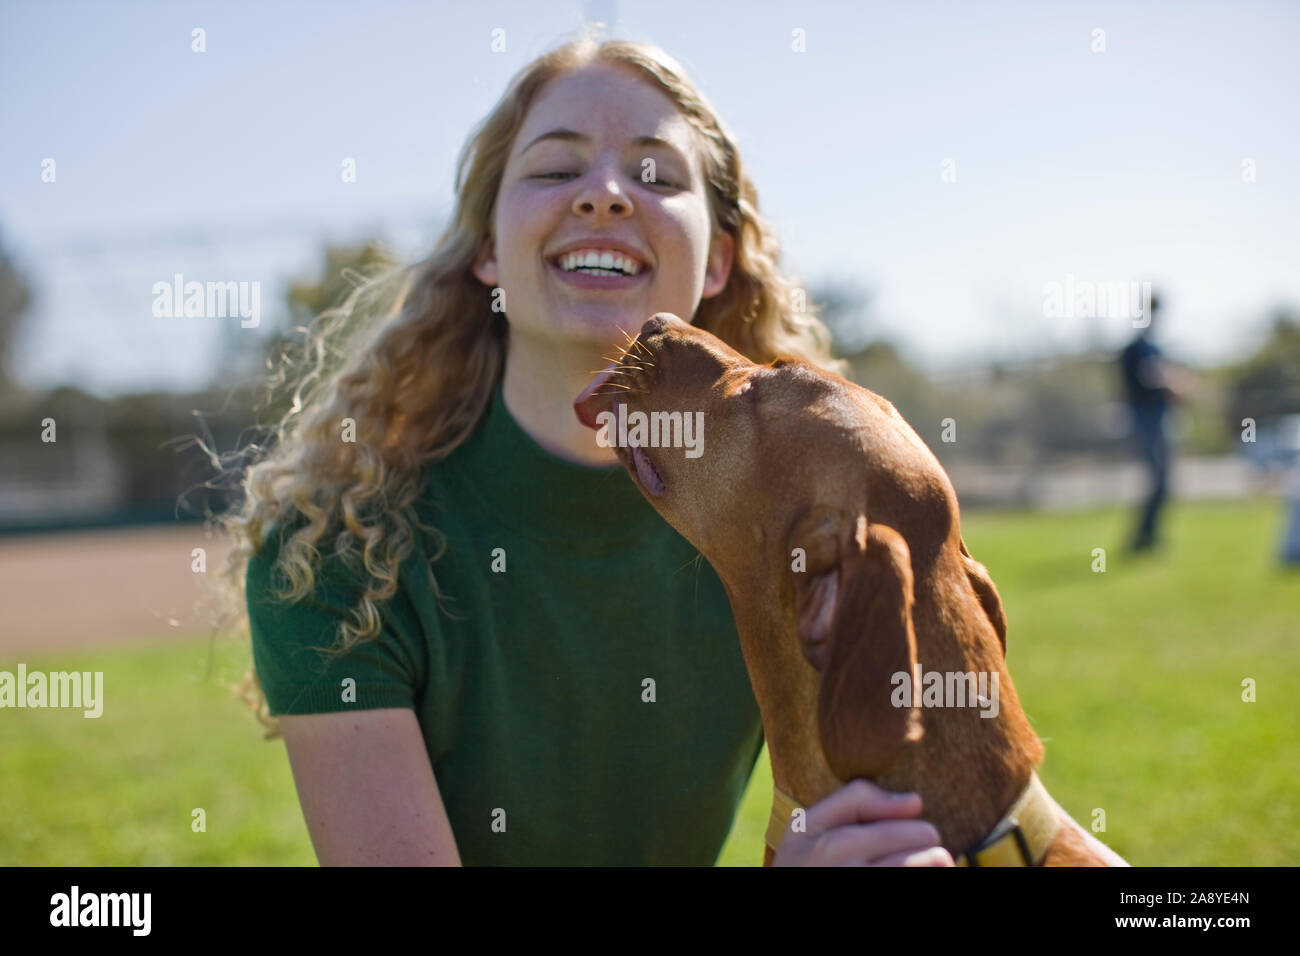 Smiling teenage girl being licked on the chin by her brown dog while at the park. Stock Photo